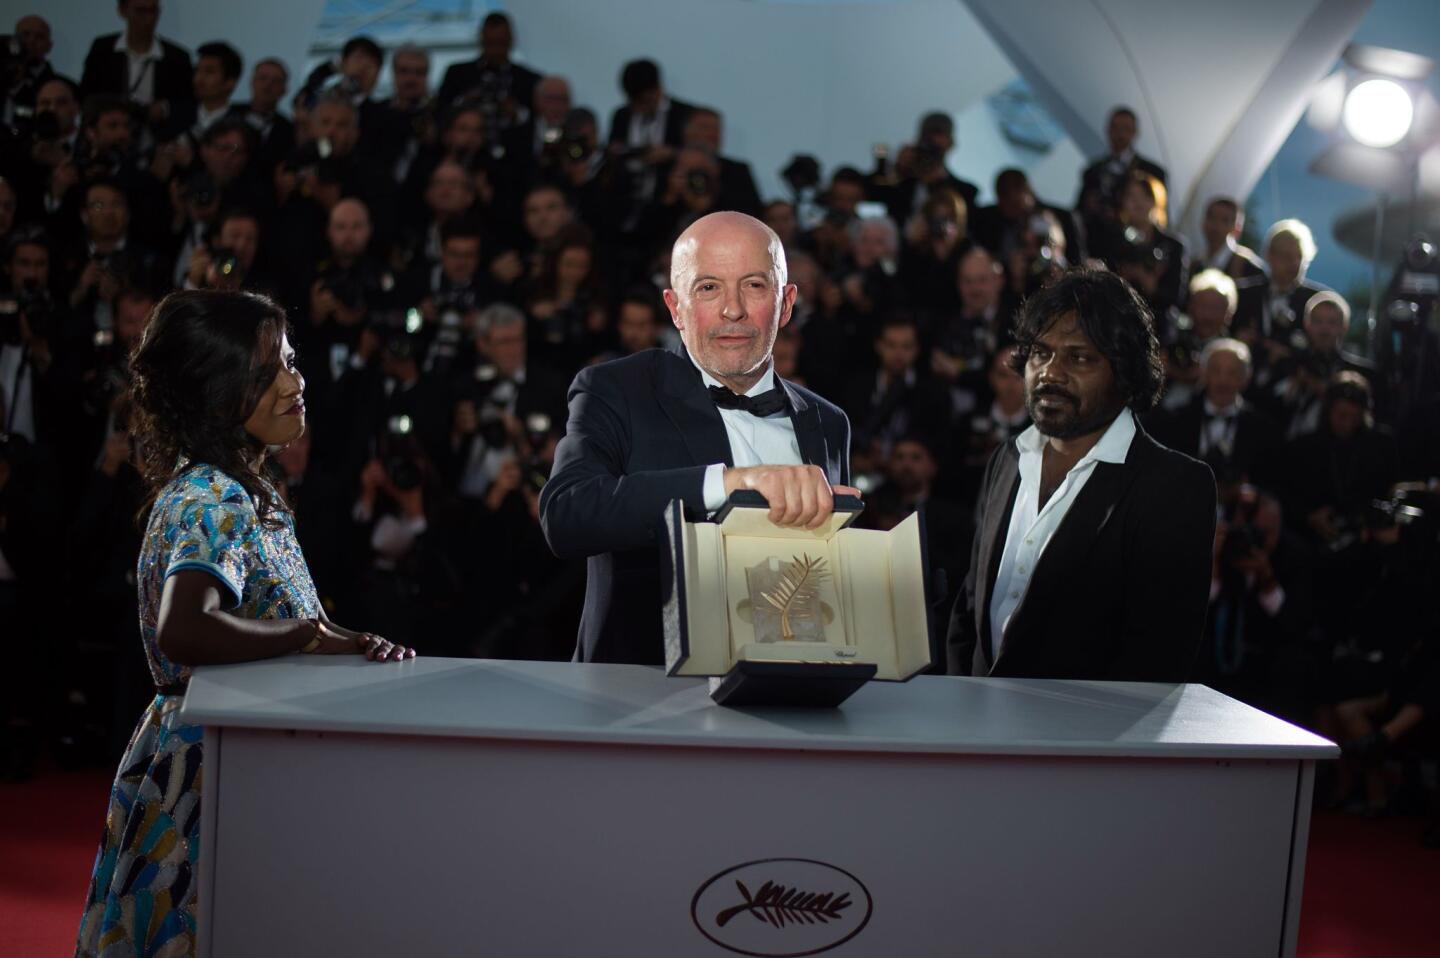 French director Jacques Audiard (C) holds his prize as he poses with Sri Lankan actress Kalieaswari Srinivasan (L) and Sri Lankan actor Jesuthasan Antonythasan during a photocall after he was awarded with the Palme d'Or for his film "Dheepan" during the closing ceremony of the 68th Cannes Film Festival in Cannes, southeastern France, on May 24, 2015. AFP PHOTO / BERTRAND LANGLOISBERTRAND LANGLOIS/AFP/Getty Images ** OUTS - ELSENT, FPG - OUTS * NM, PH, VA if sourced by CT, LA or MoD **